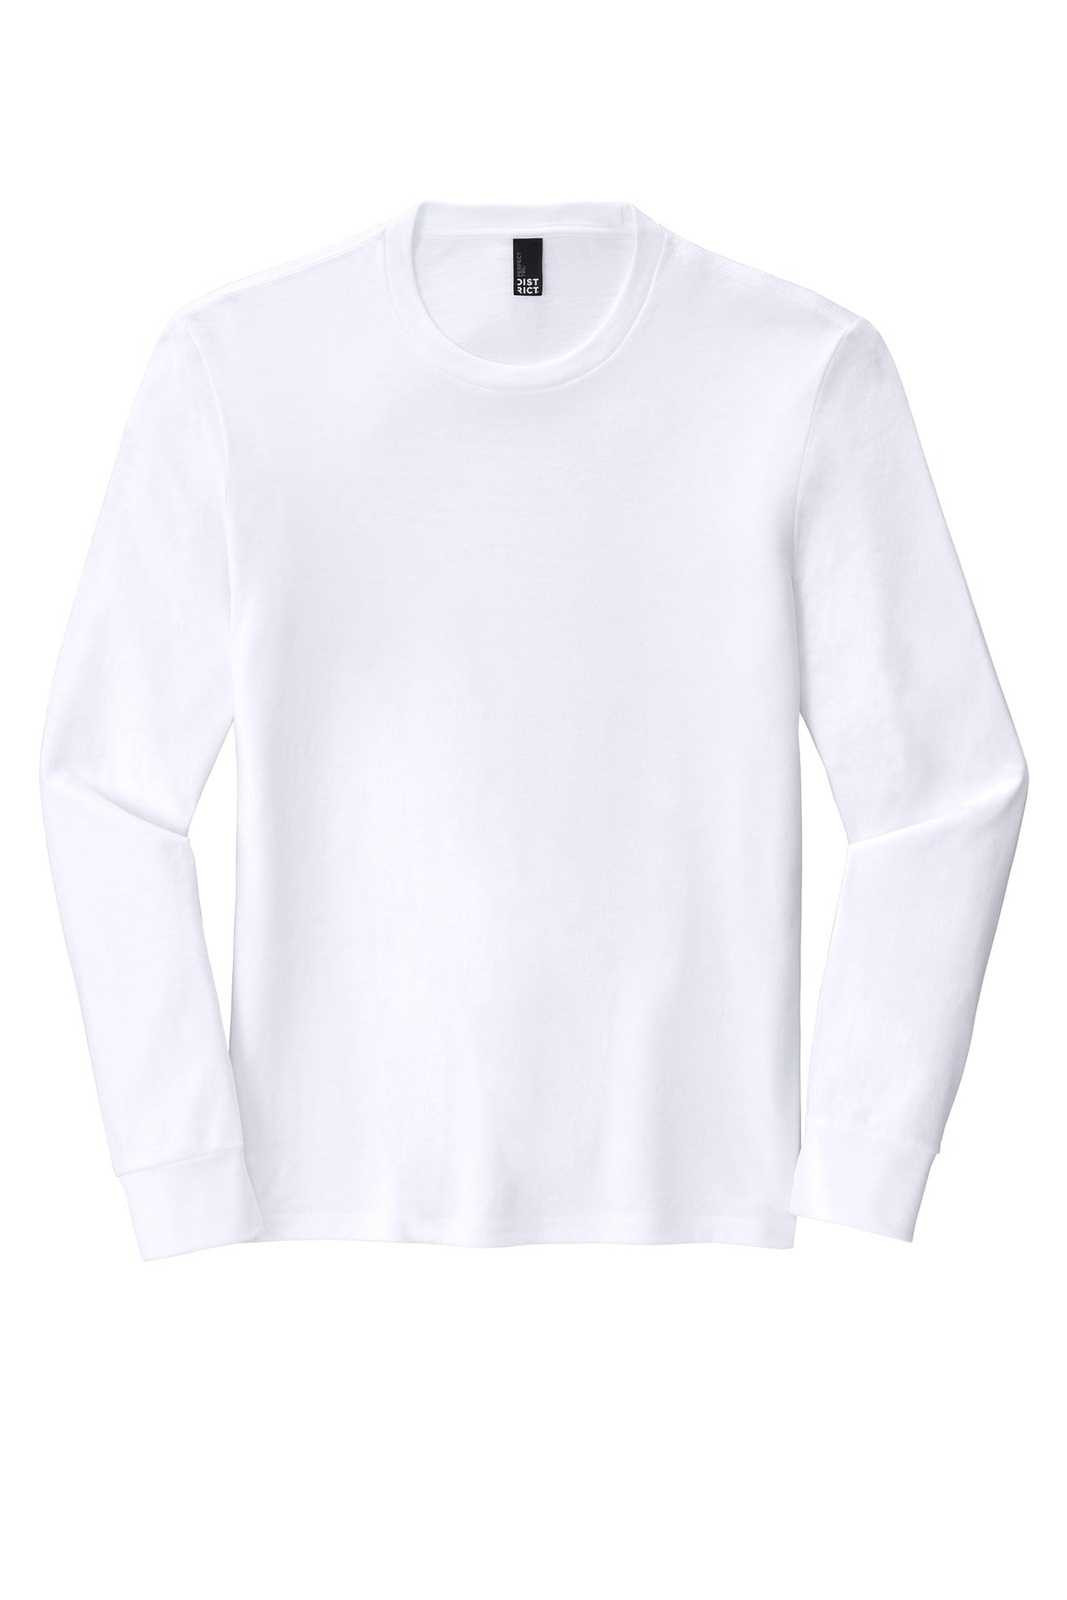 District DM132 Perfect Tri Long Sleeve Tee - White - HIT a Double - 2